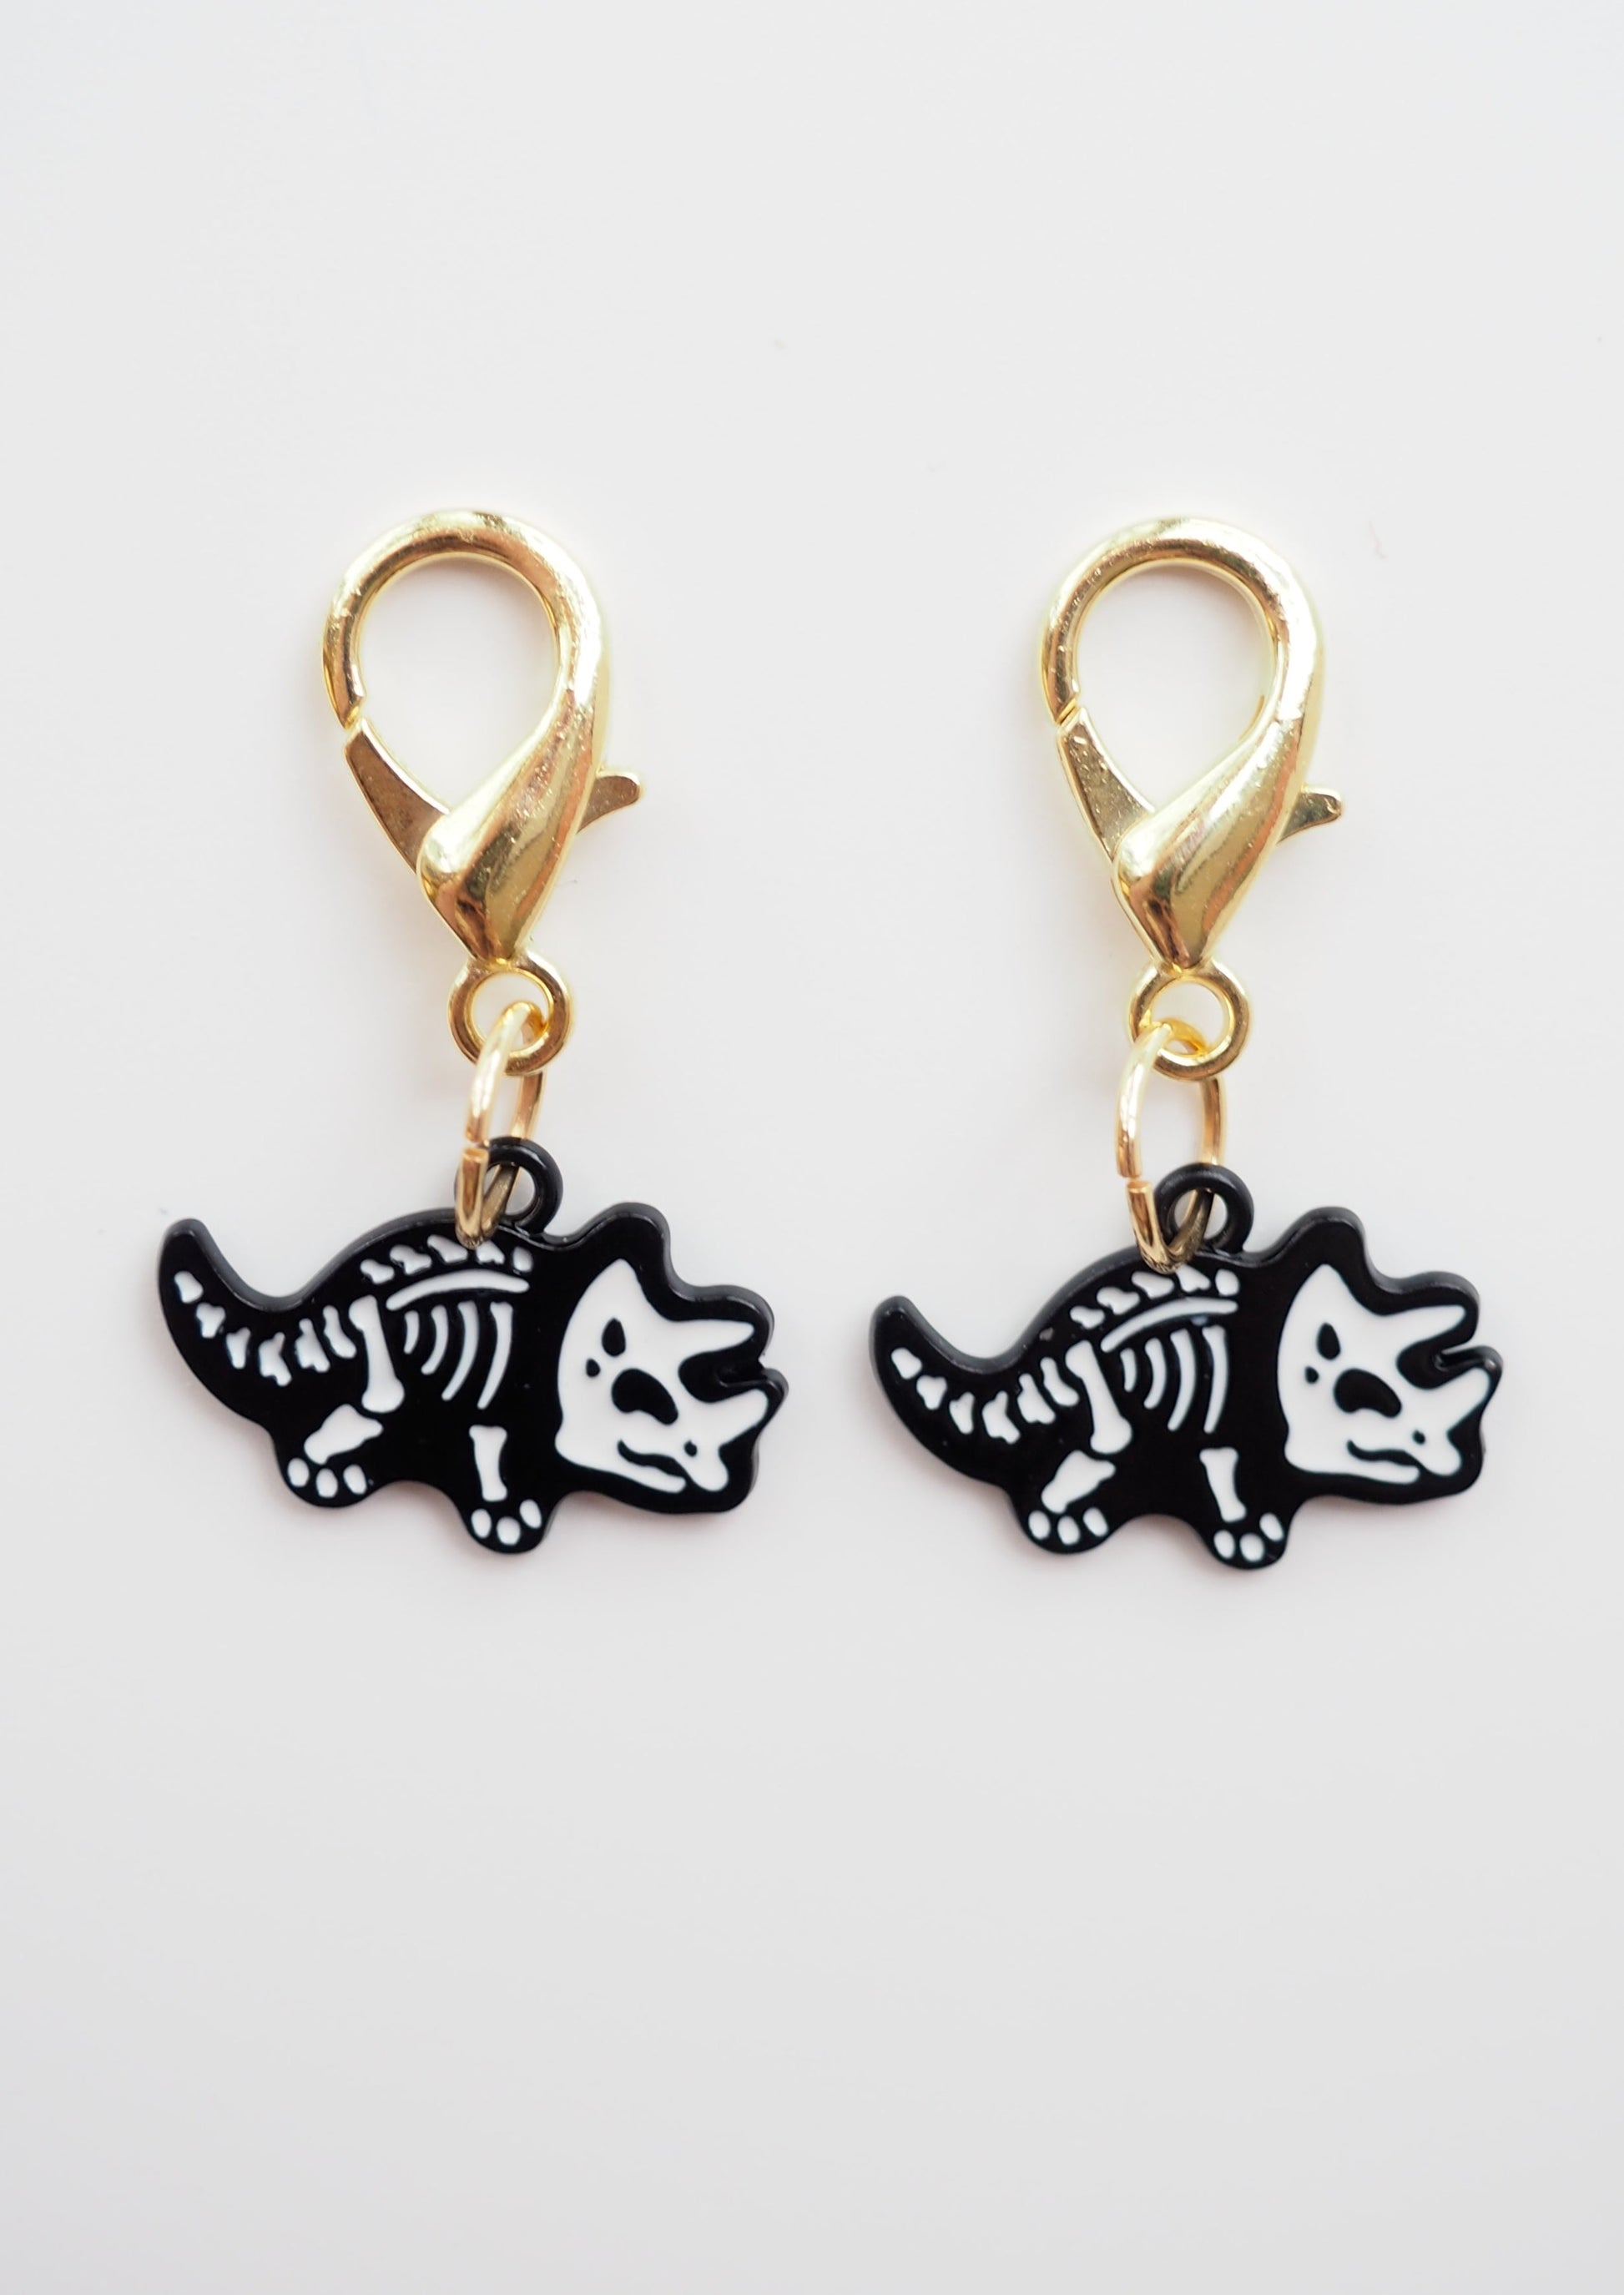 Set of 2 skeleton dinosaur stitch markers for knitting and crochet projects. Playful accessories from Good Grief Toronto.